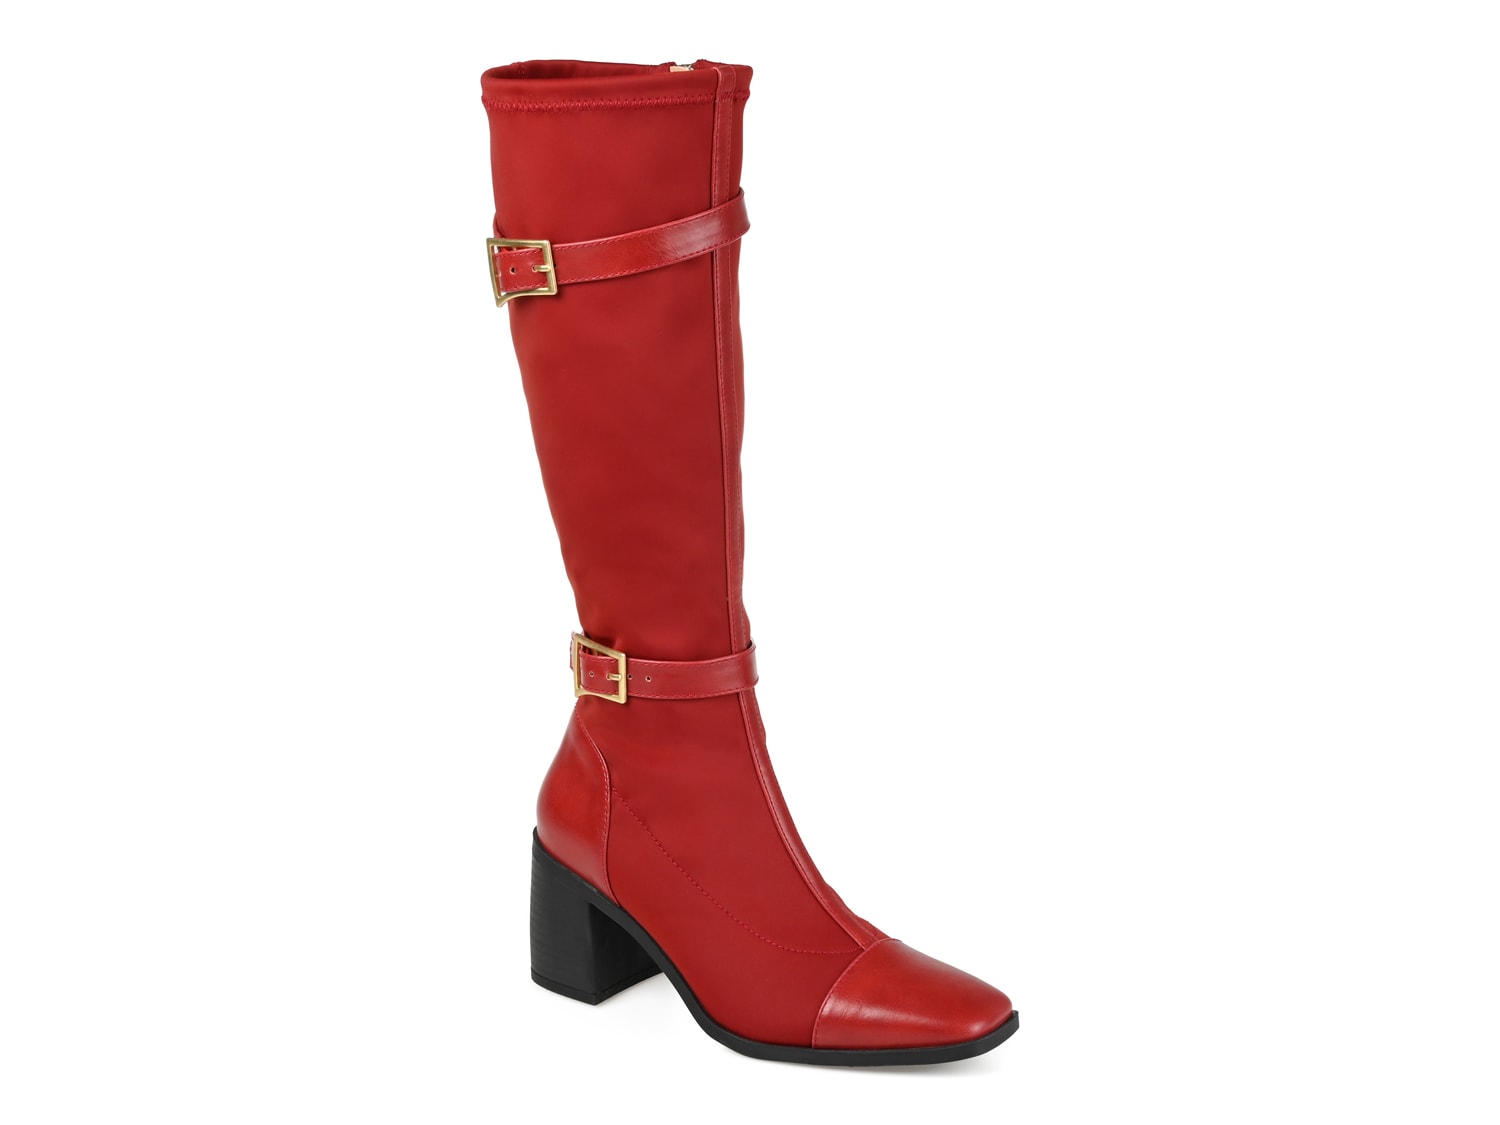 Journee Collection Gaibree Riding Boot - Free Shipping | DSW